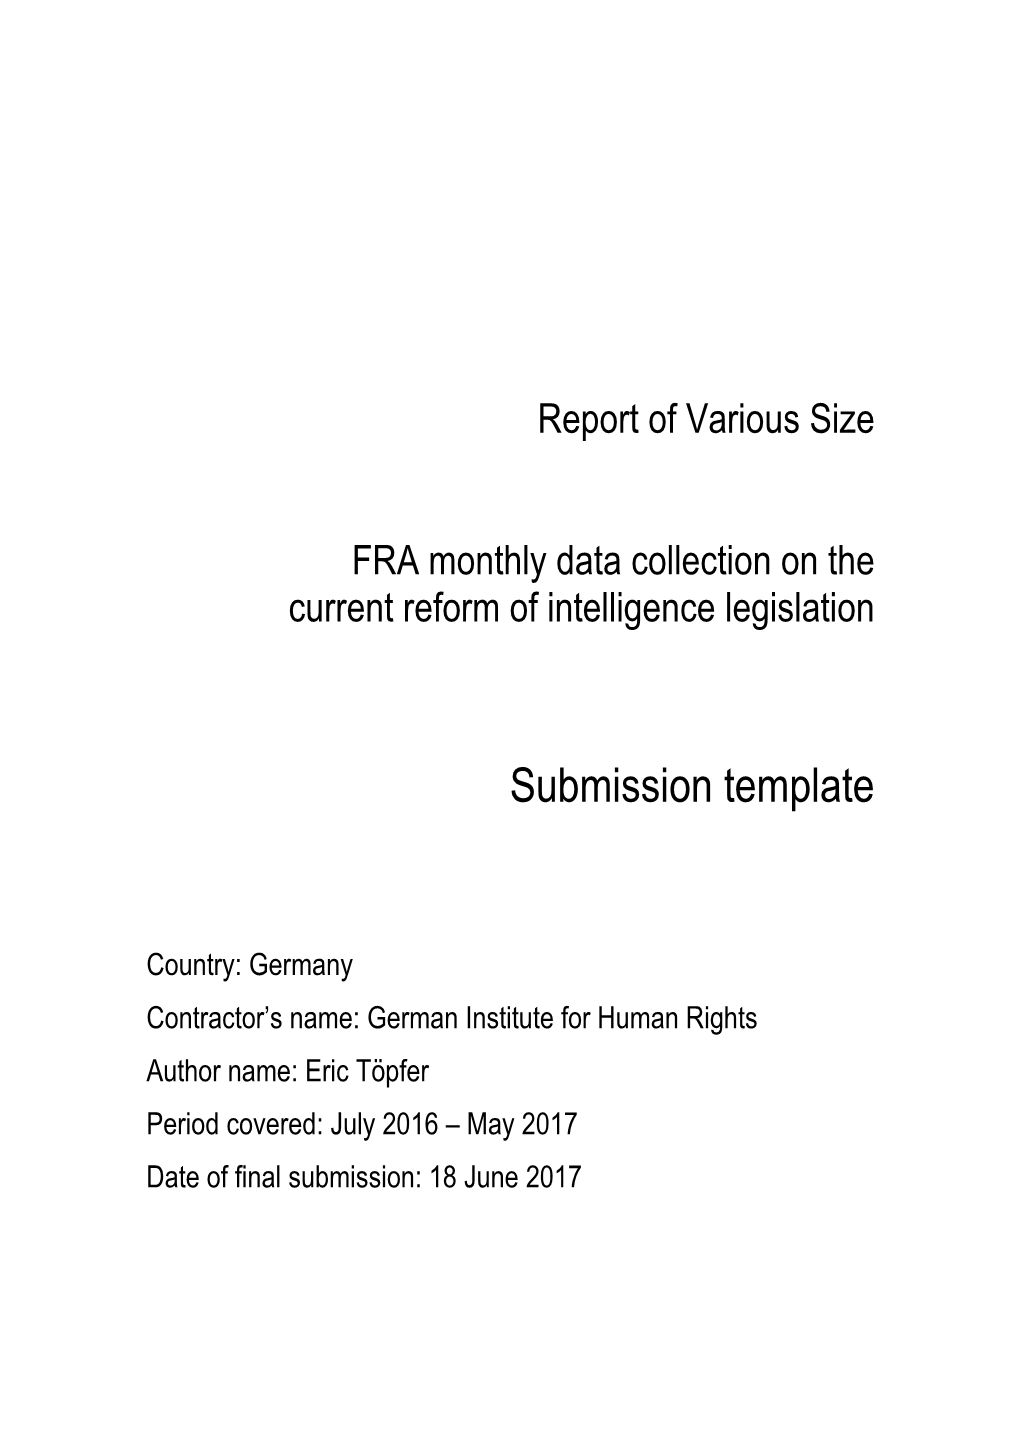 Monthly Data Collection on the Current Reform of Intelligence Legislation